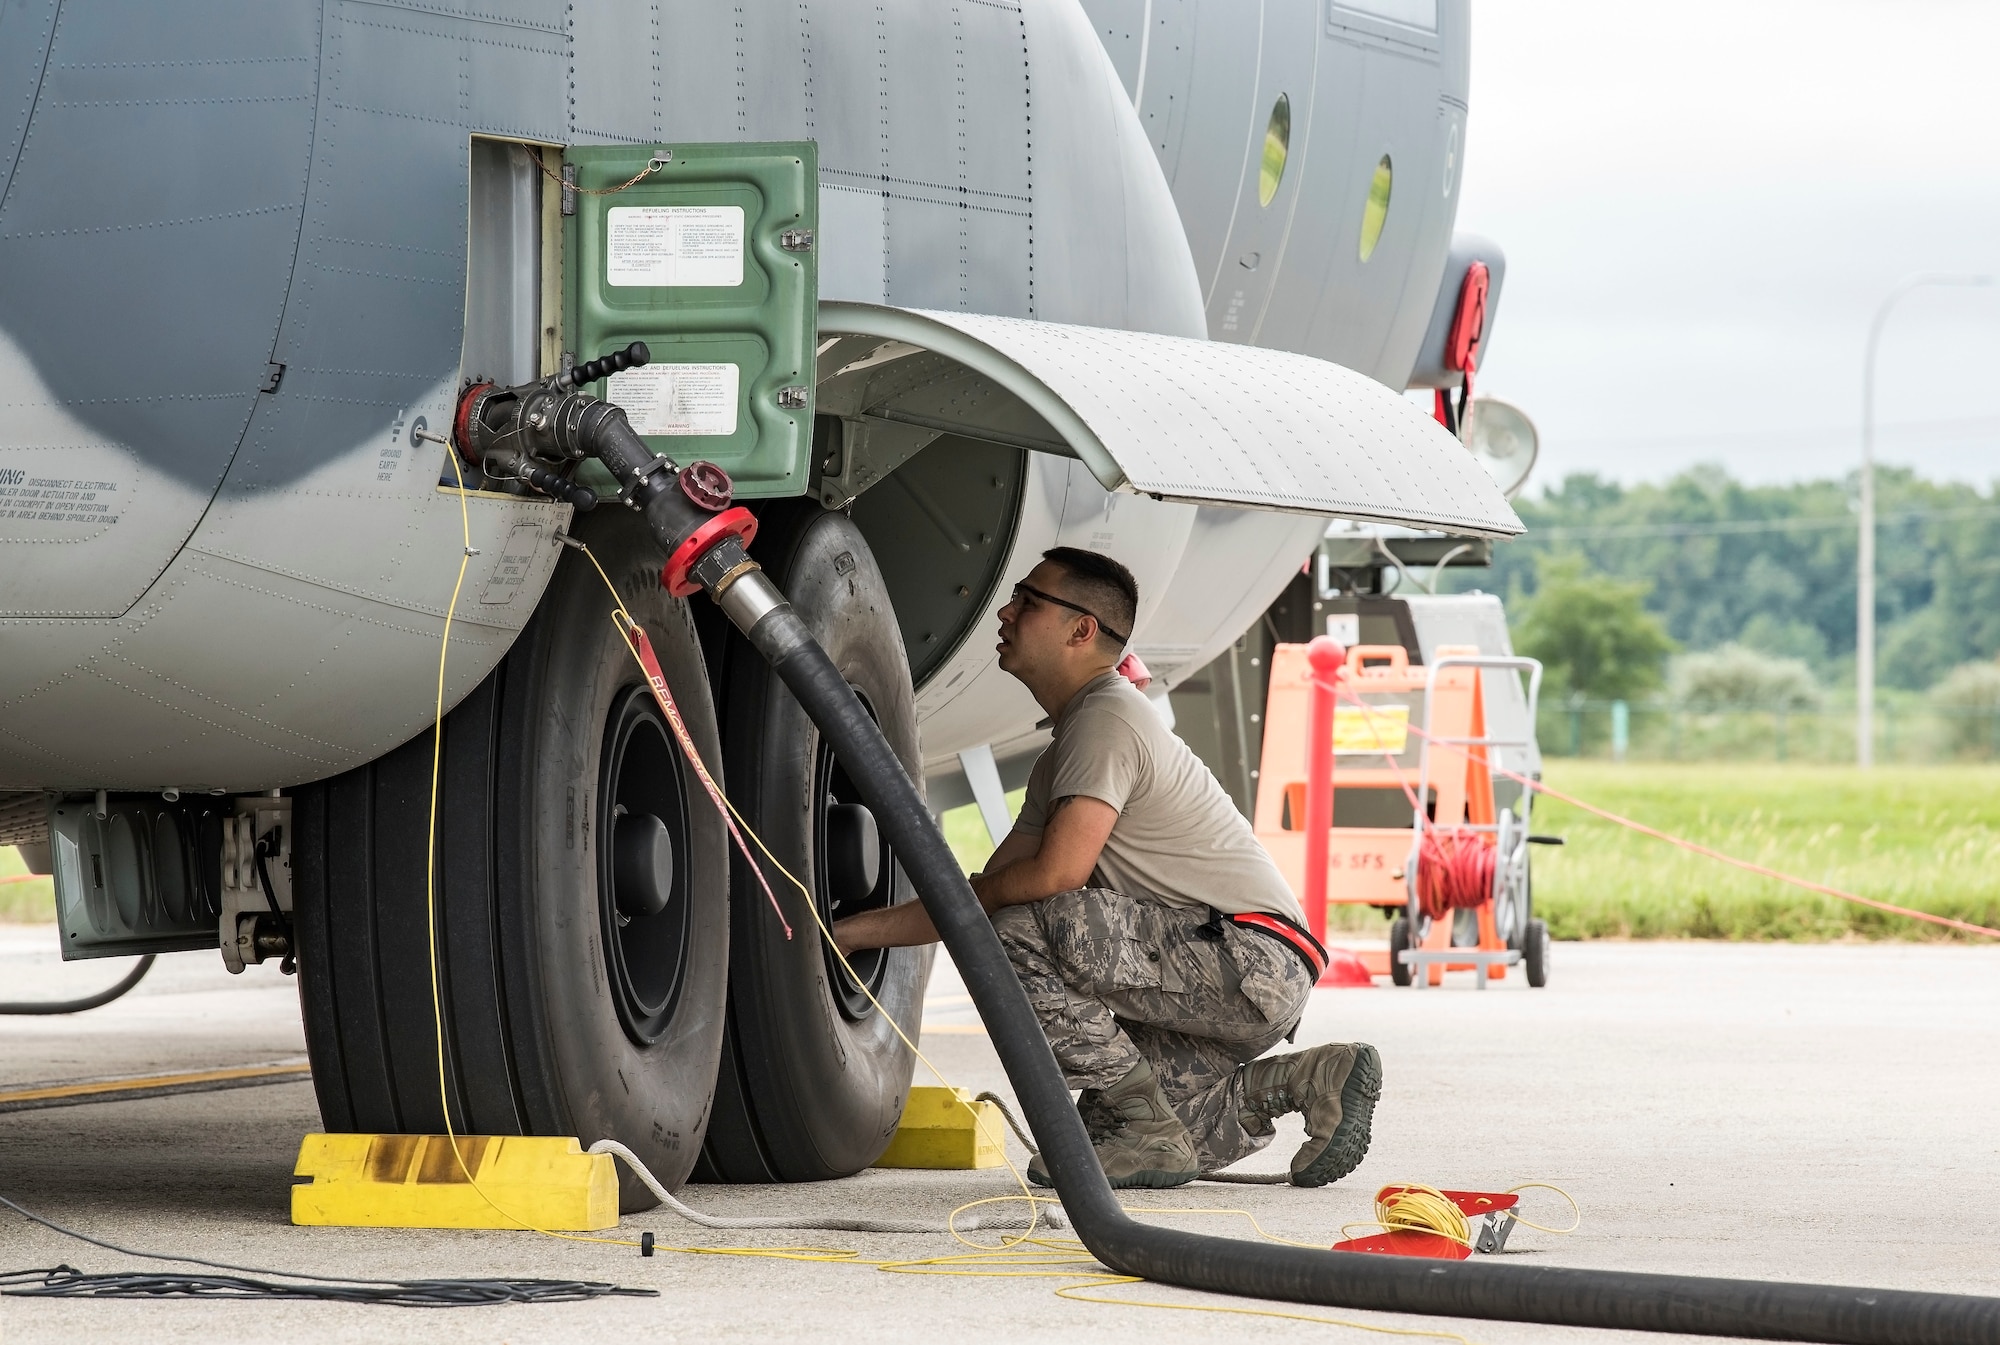 An Alaska Air National Guard aircraft maintainer from the 176th Wing, Joint Base Elmendorf-Richardson, Alaska,   inspects the main landing gear tires of a HC-130J Sept. 13, 2018, at Dover Air Force Base, Del. Members and equipment from the 176th Wing, 176th Aircraft Maintenance Squadron, 211th and 212th Rescue Squadrons at JBER arrived at Dover on Sept. 12 to support hurricane relief efforts when called upon. (U.S. Air Force photo by Roland Balik)